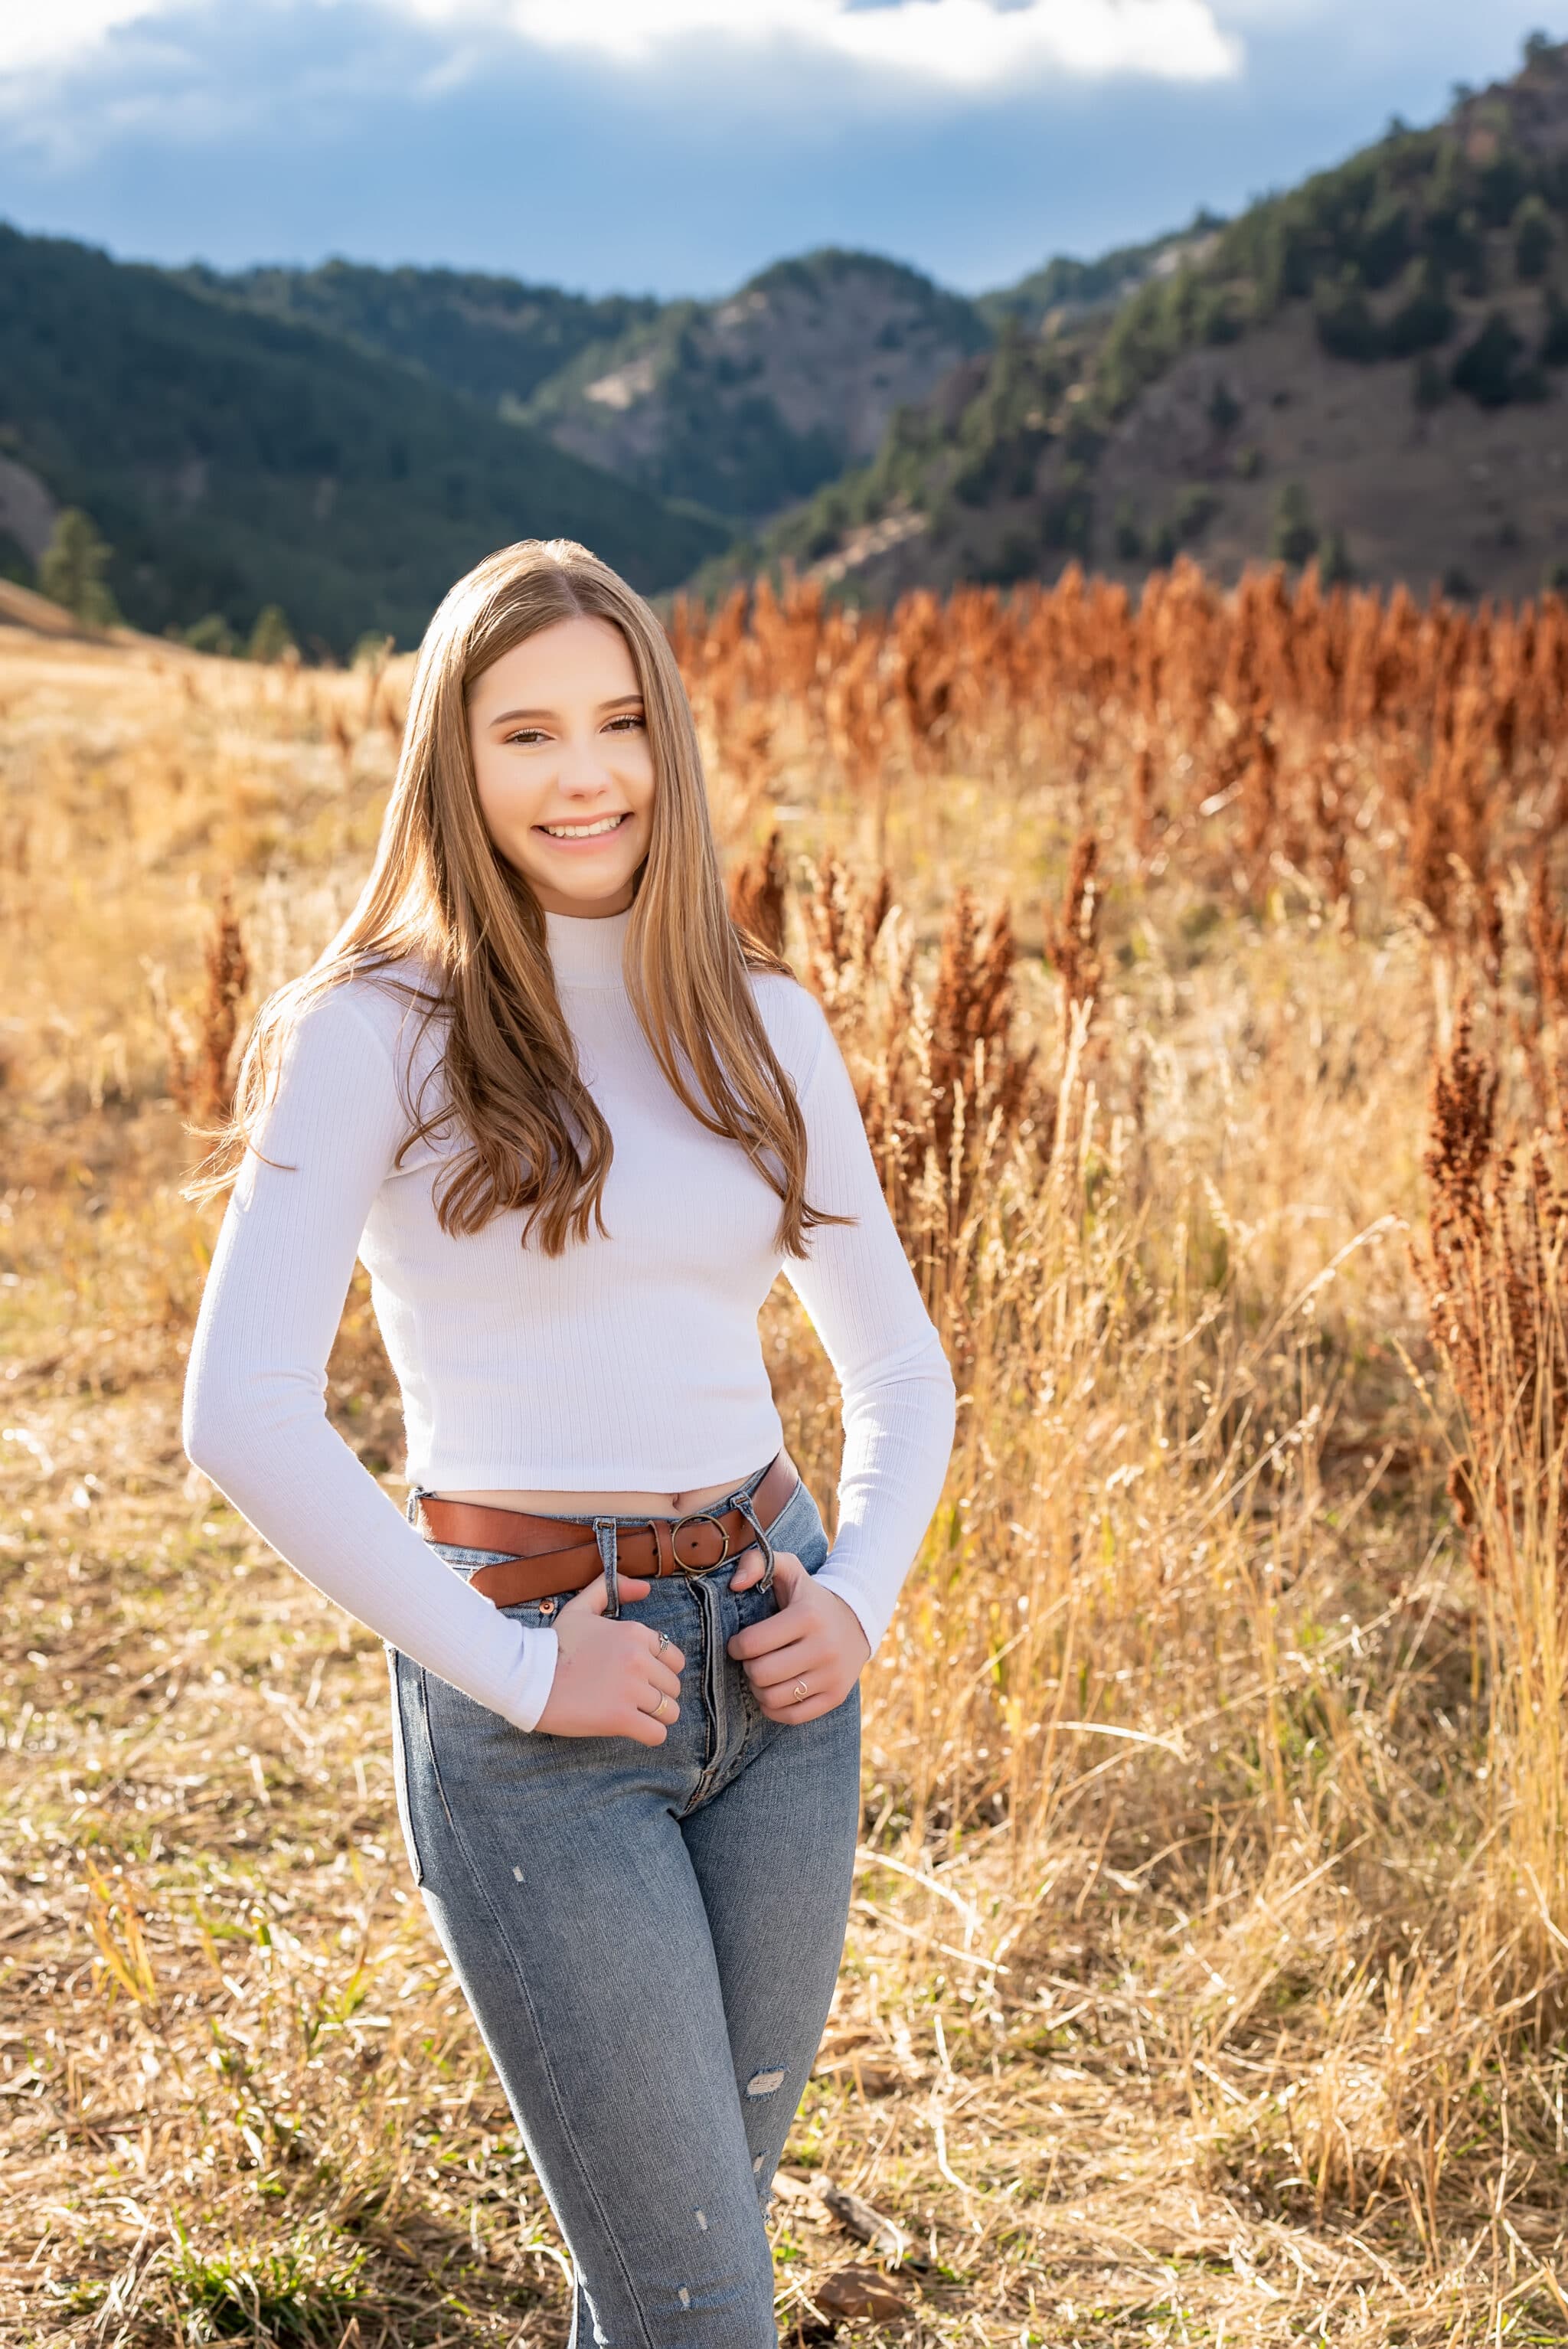 A young woman in a white turtleneck shirt, denim jeans and a belt at Chautauqua Park.